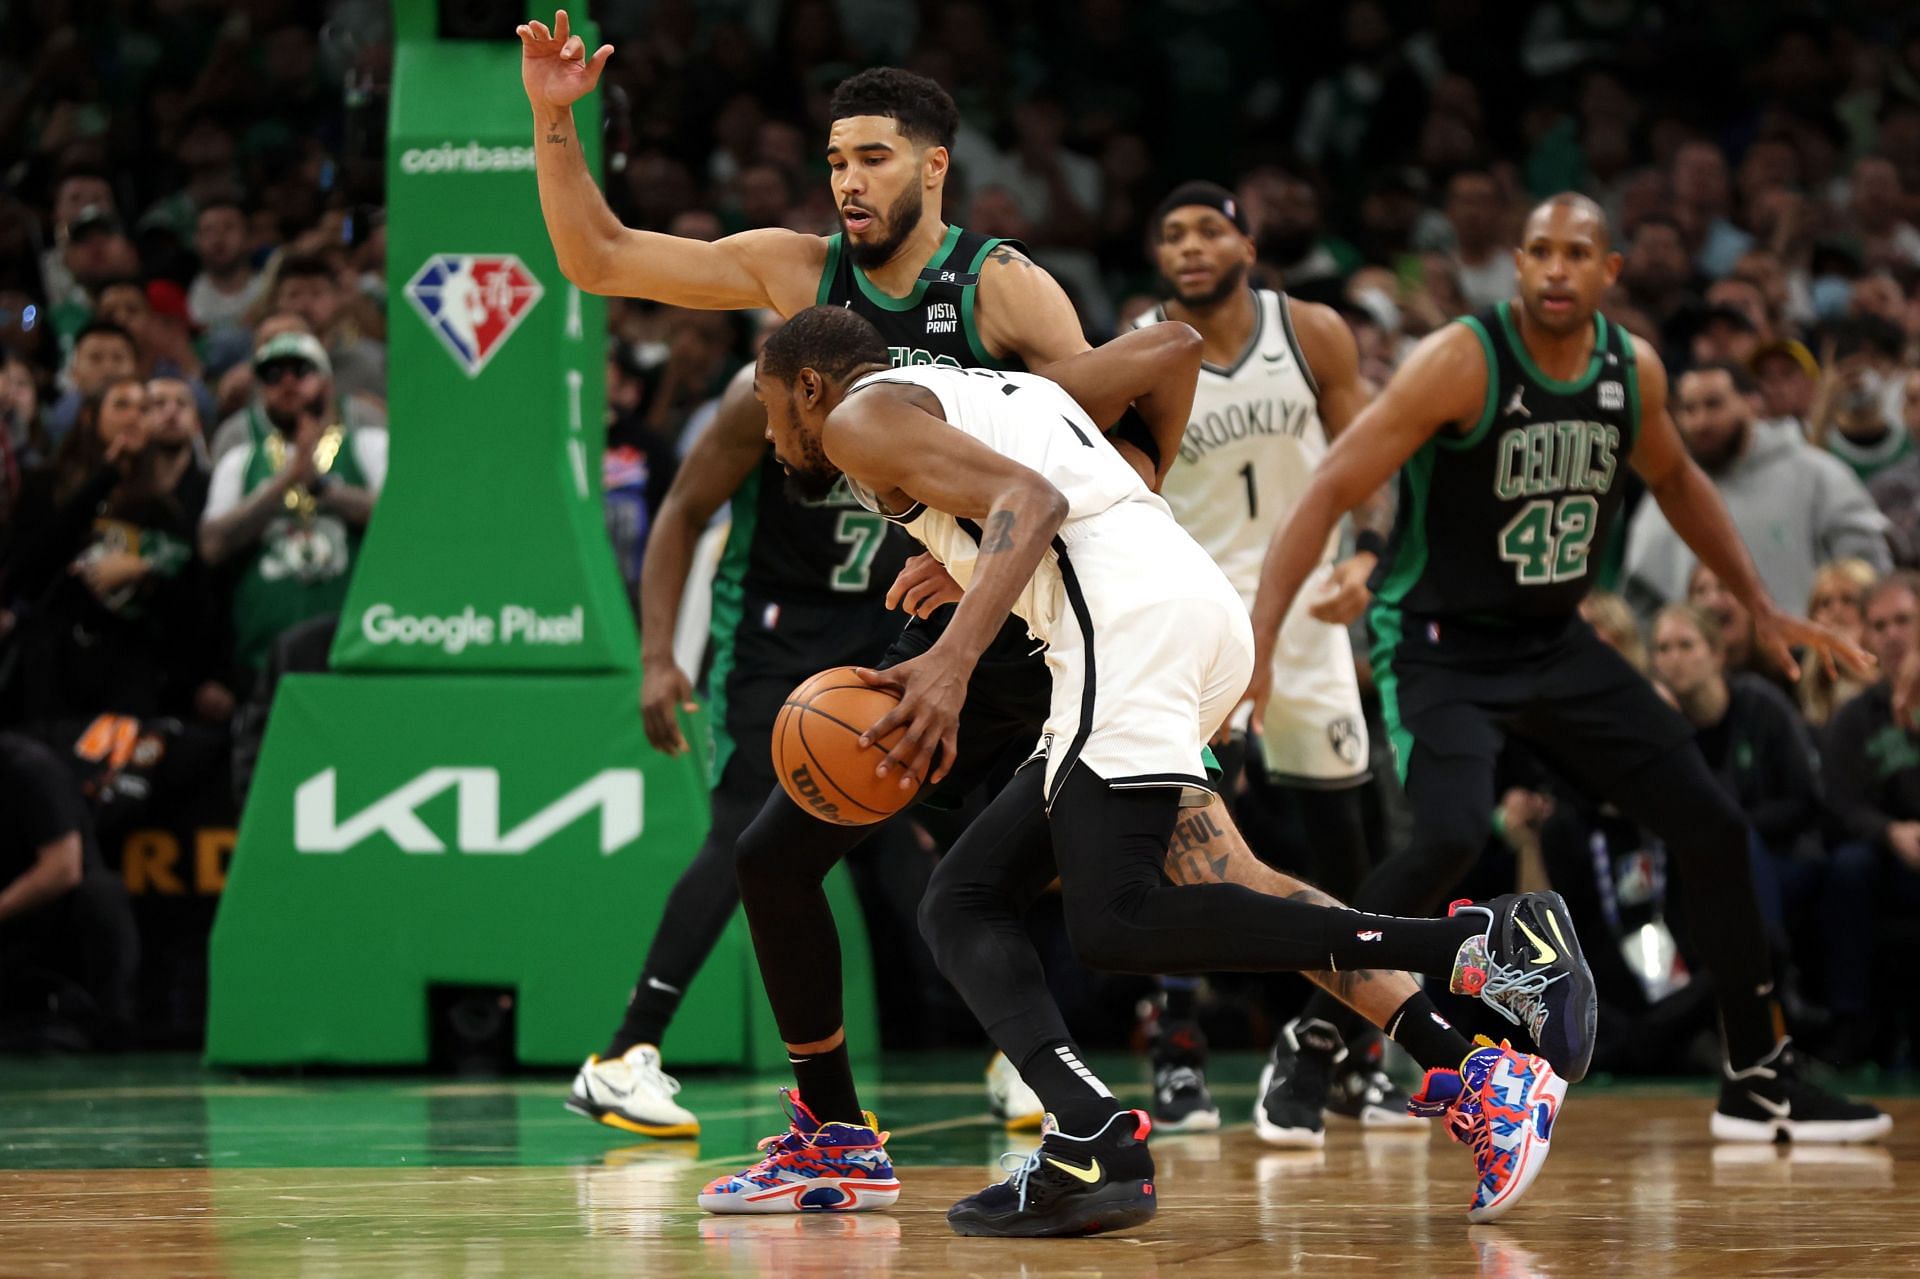 The Celtics made it difficult for Durant in game one of their playoff series.